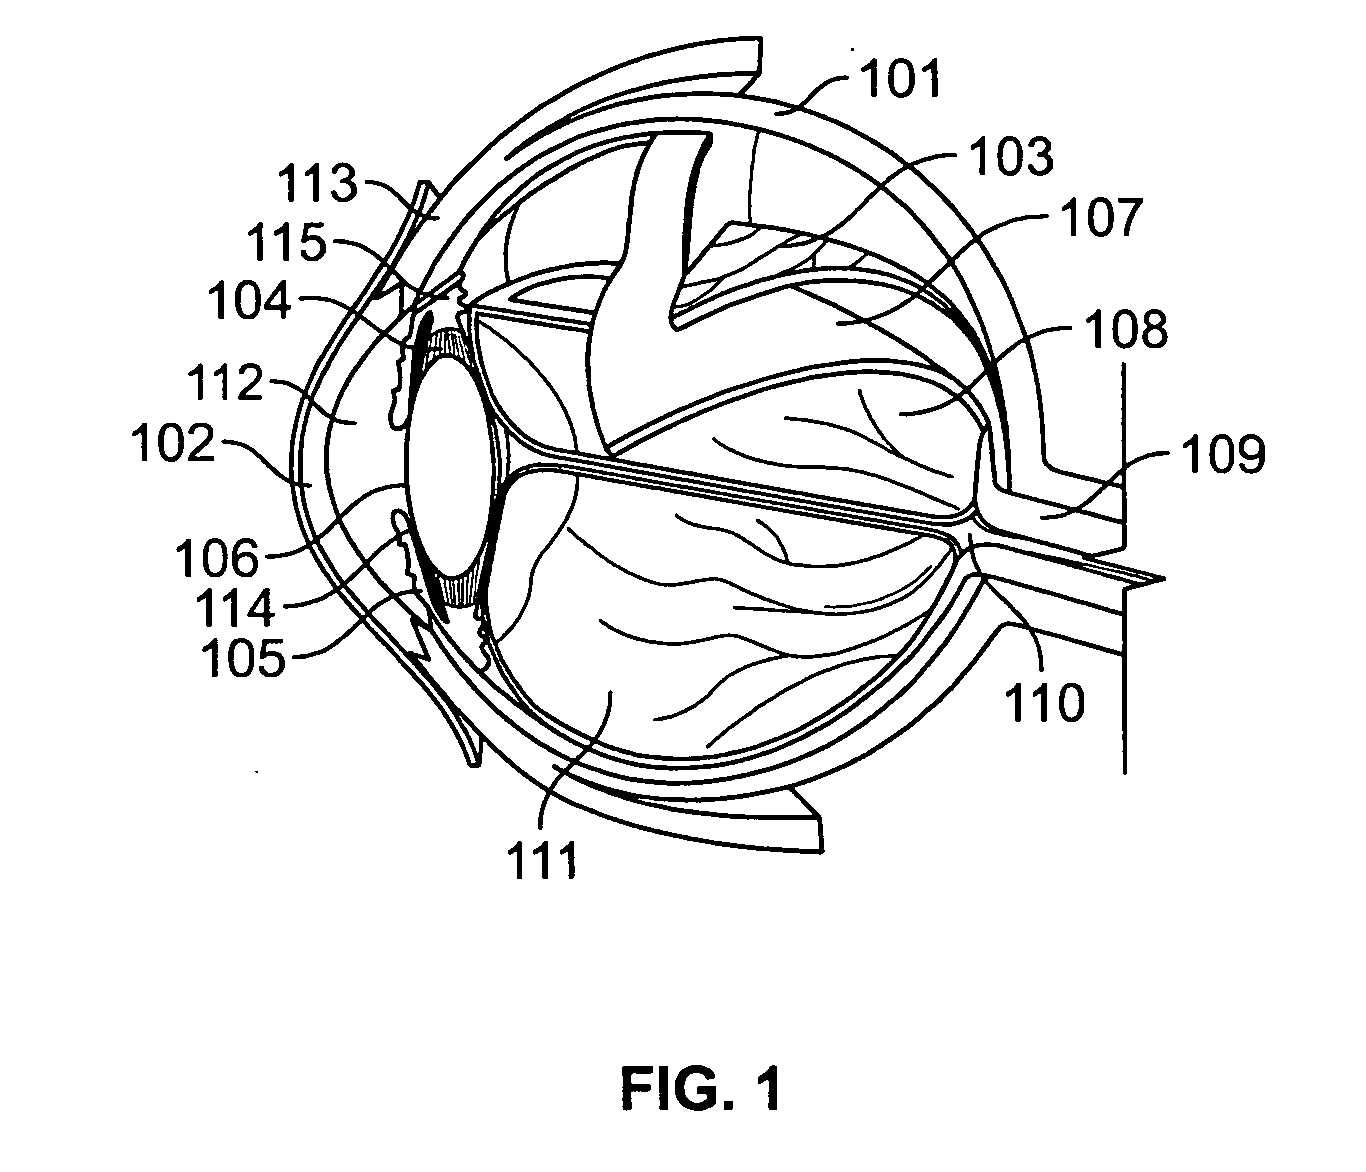 Apparatus and processes for preventing or delaying one or more symptoms of presbyopia